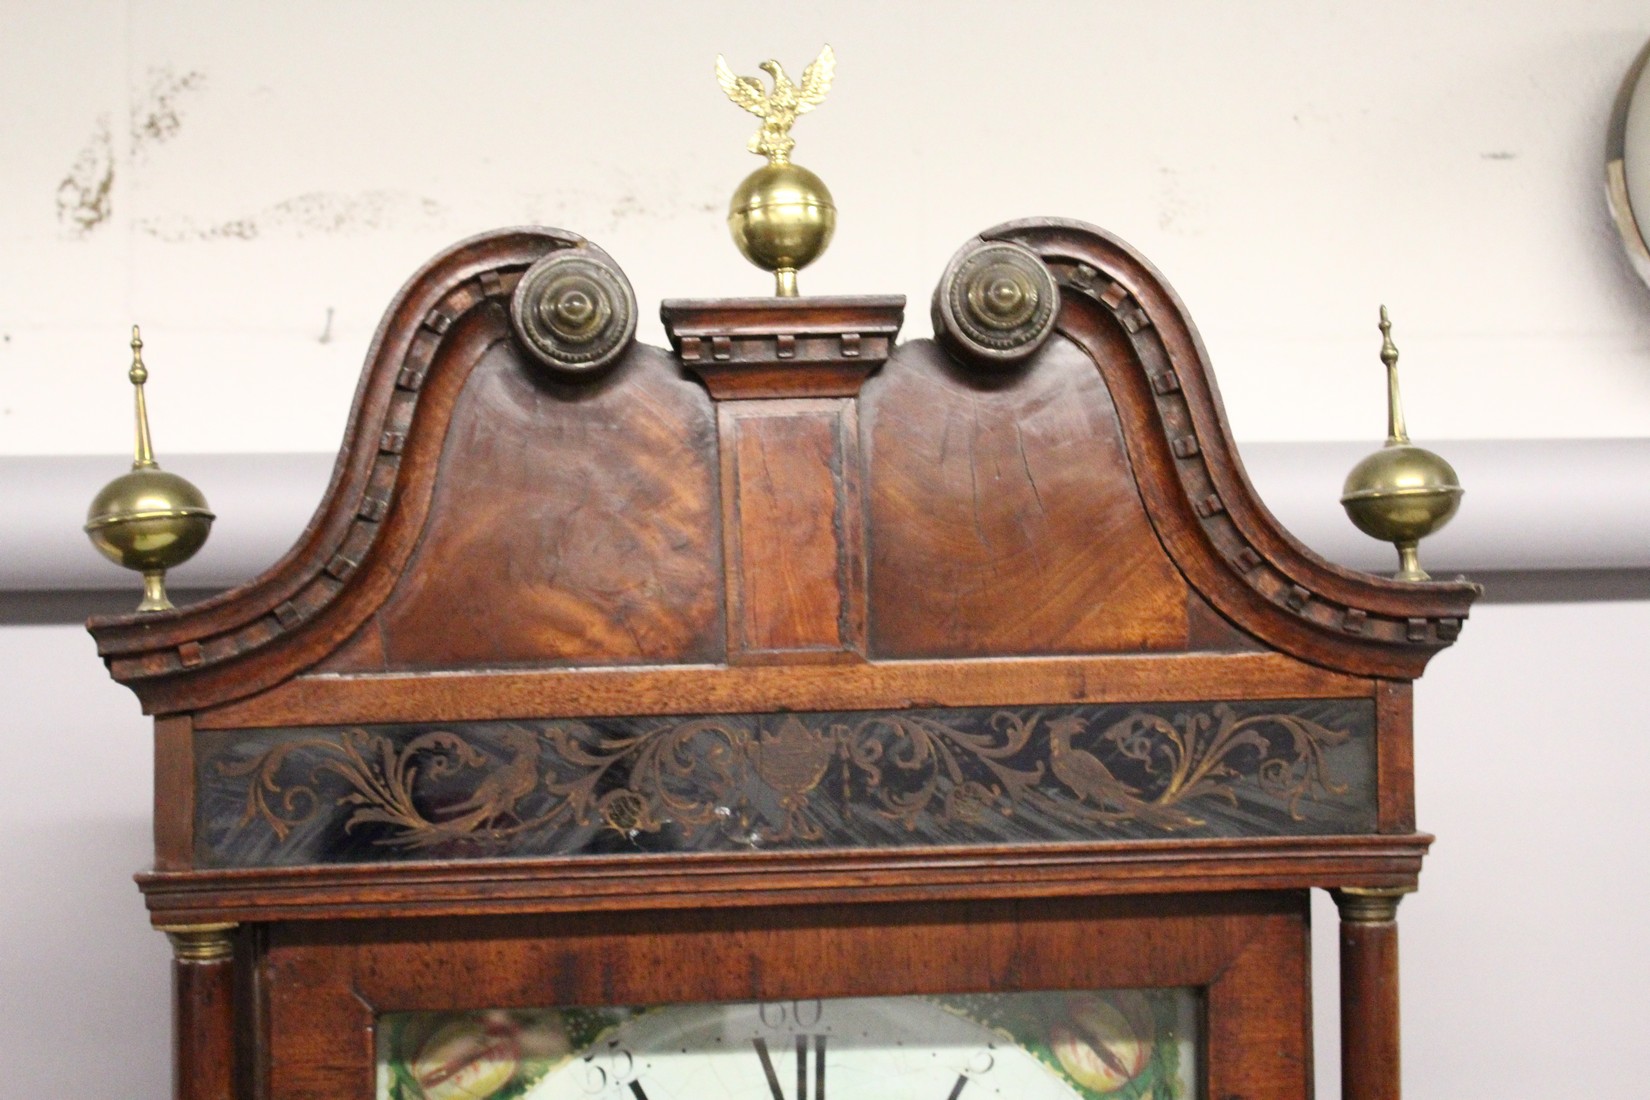 A GEORGE III MAHOGANY LONGCASE CLOCK BY BANKS, OLDHAM, with an eight day moonphase movement, - Image 3 of 9